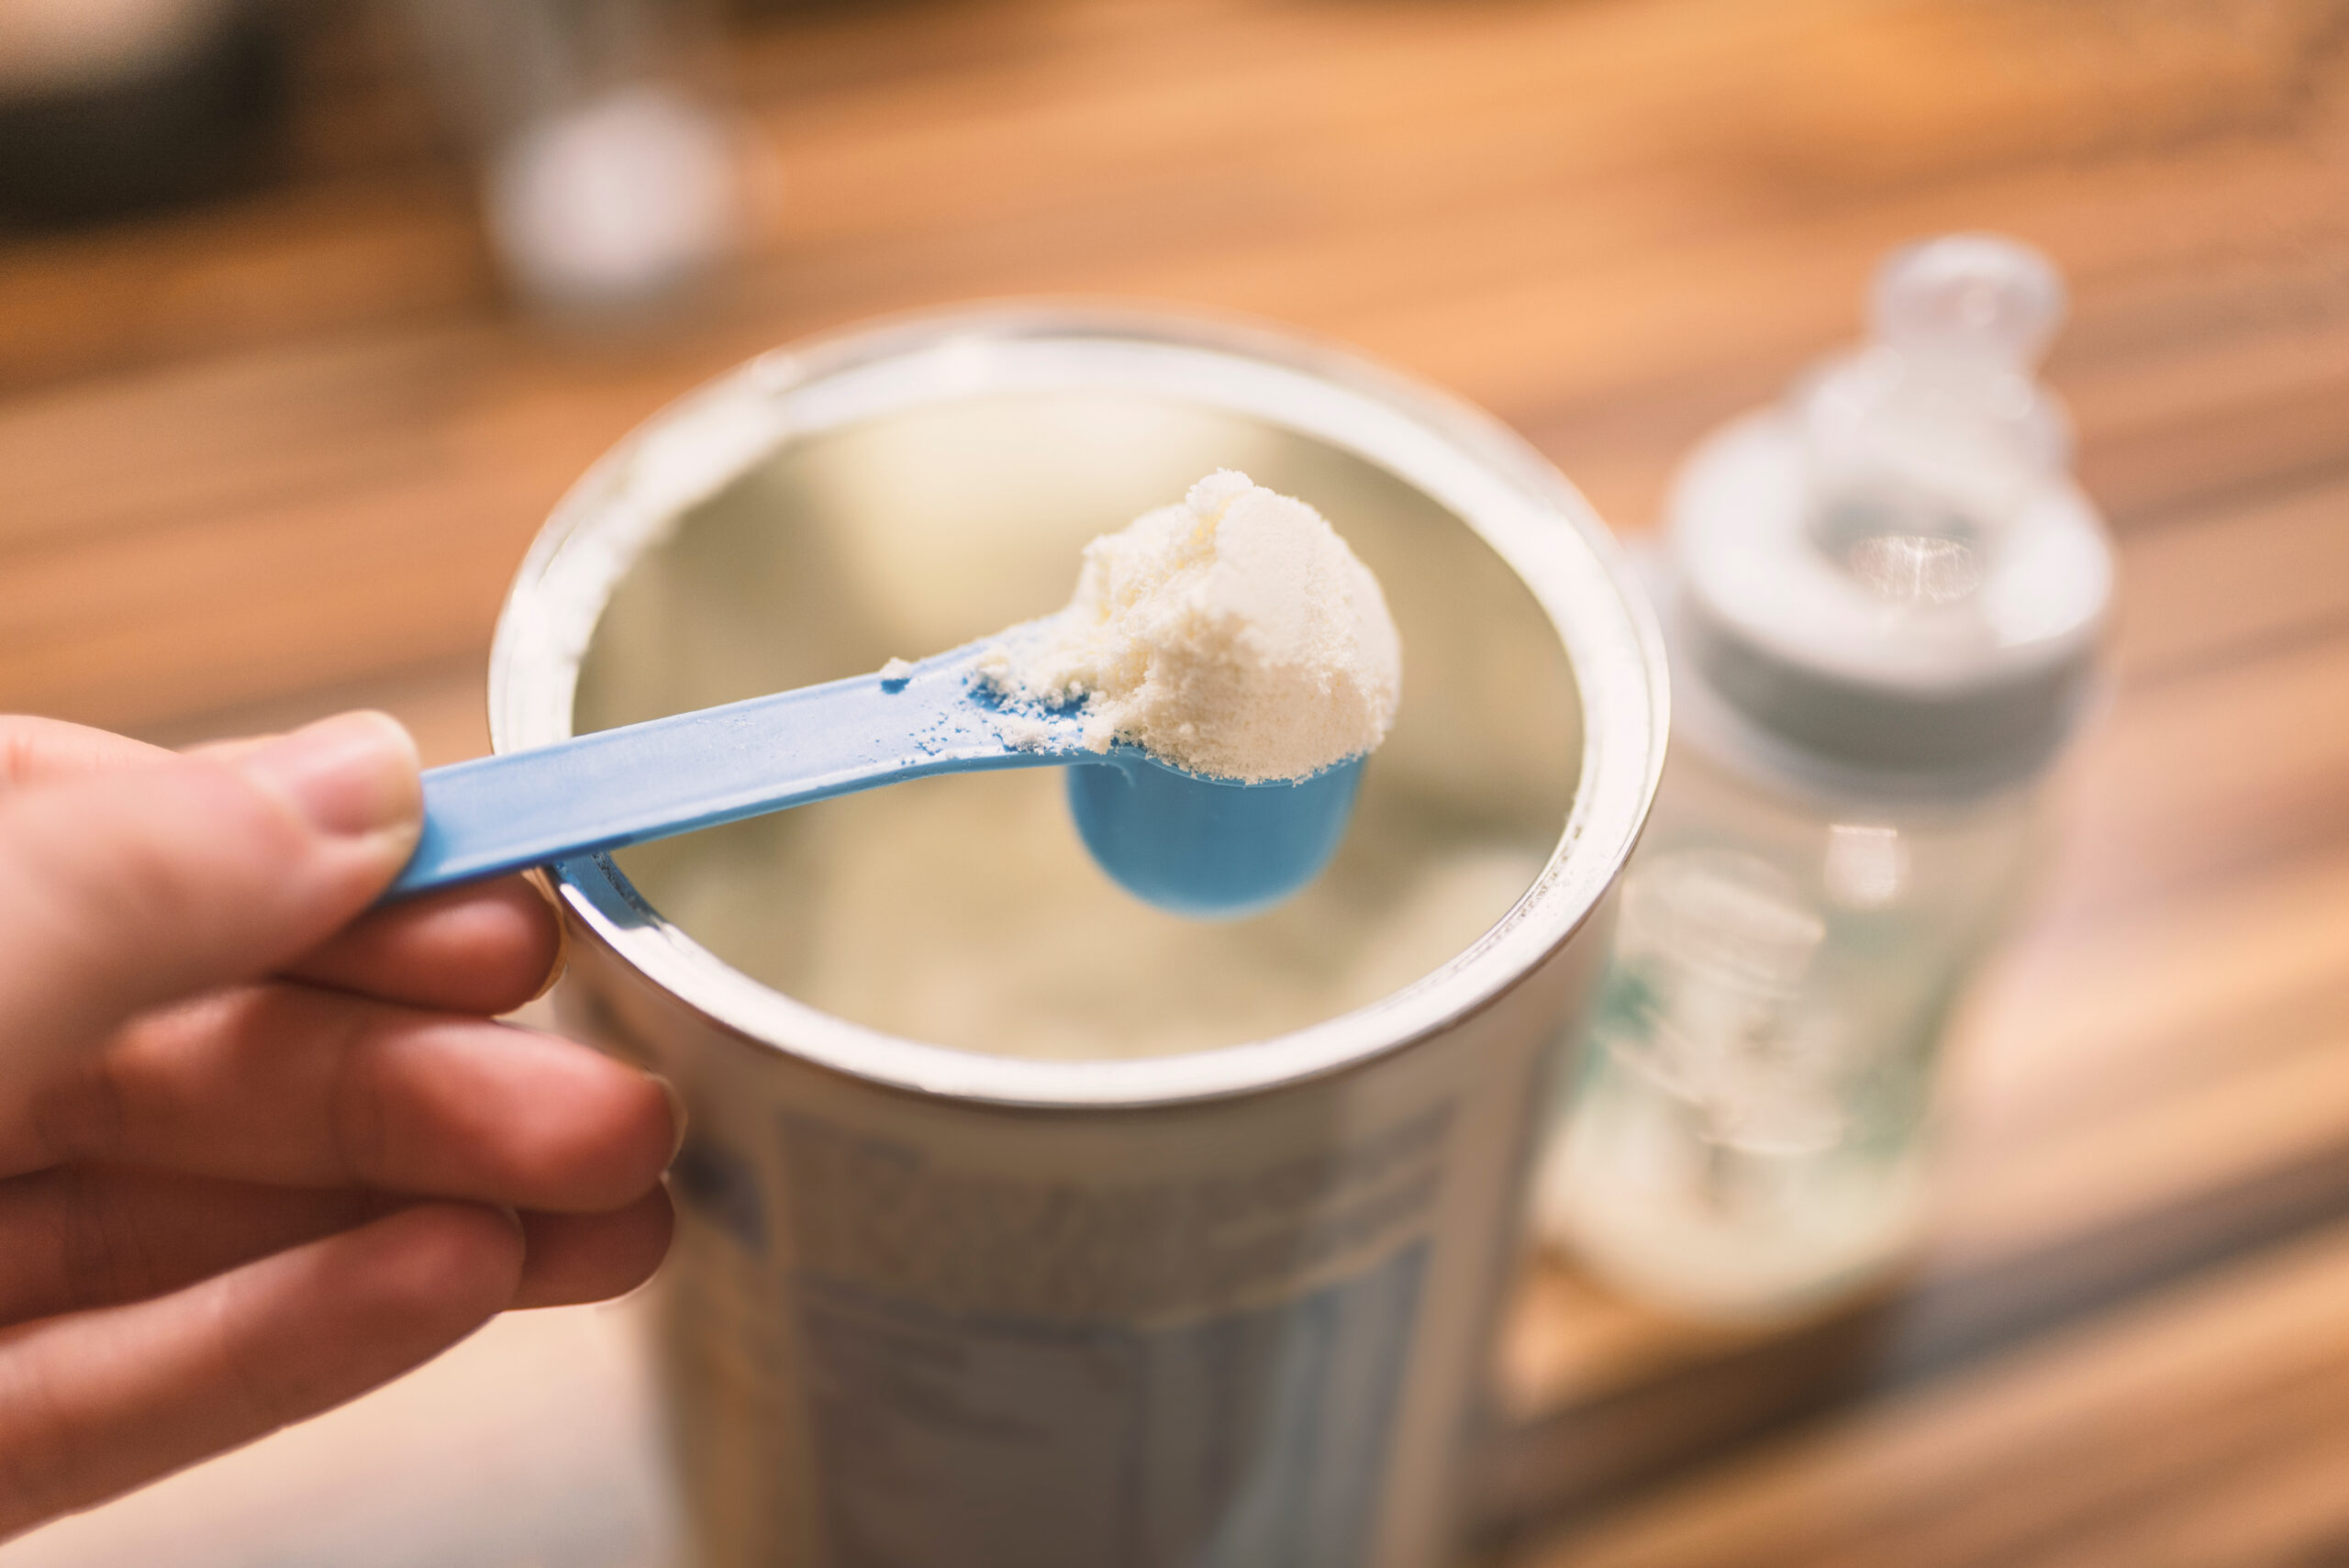 What to Know About the Infant Formula Shortage